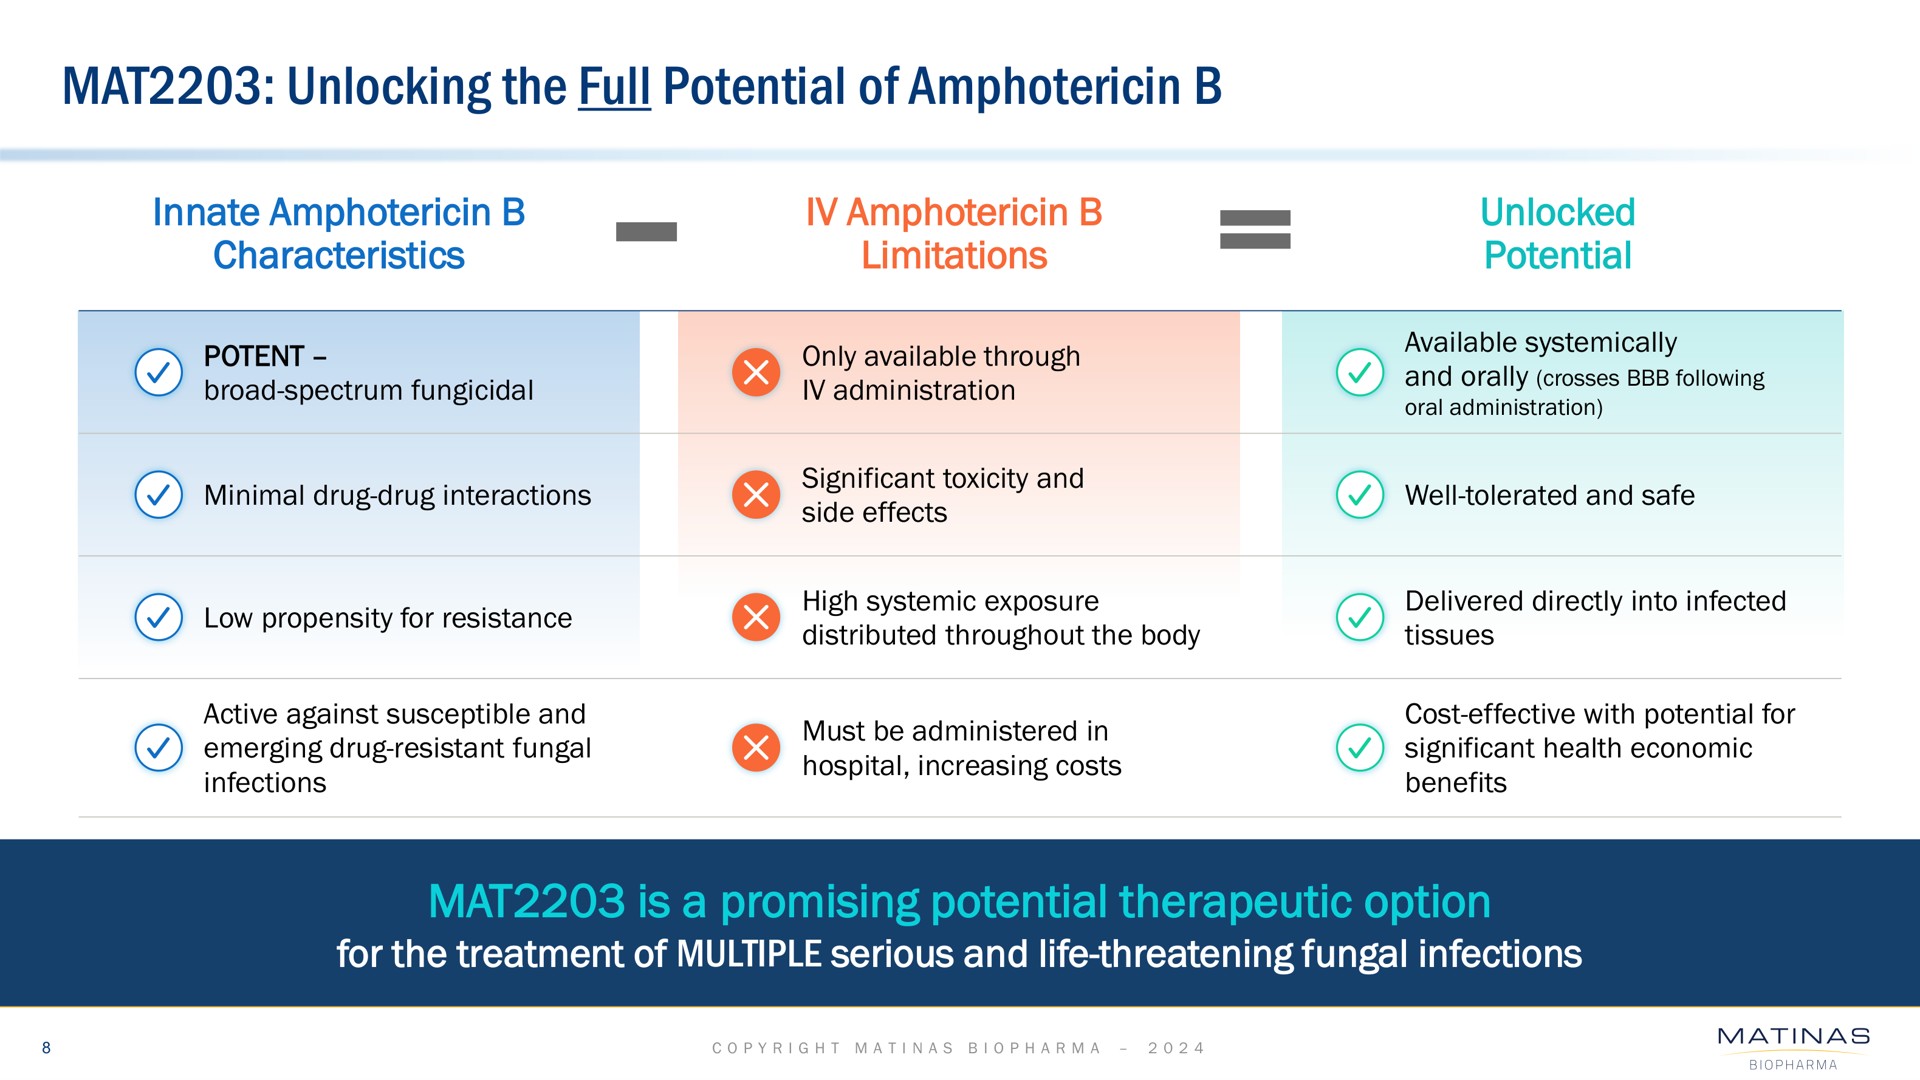 mat unlocking the full potential of mat is a promising potential therapeutic option characteristics limitations potent only available through available systemically | Matinas BioPharma